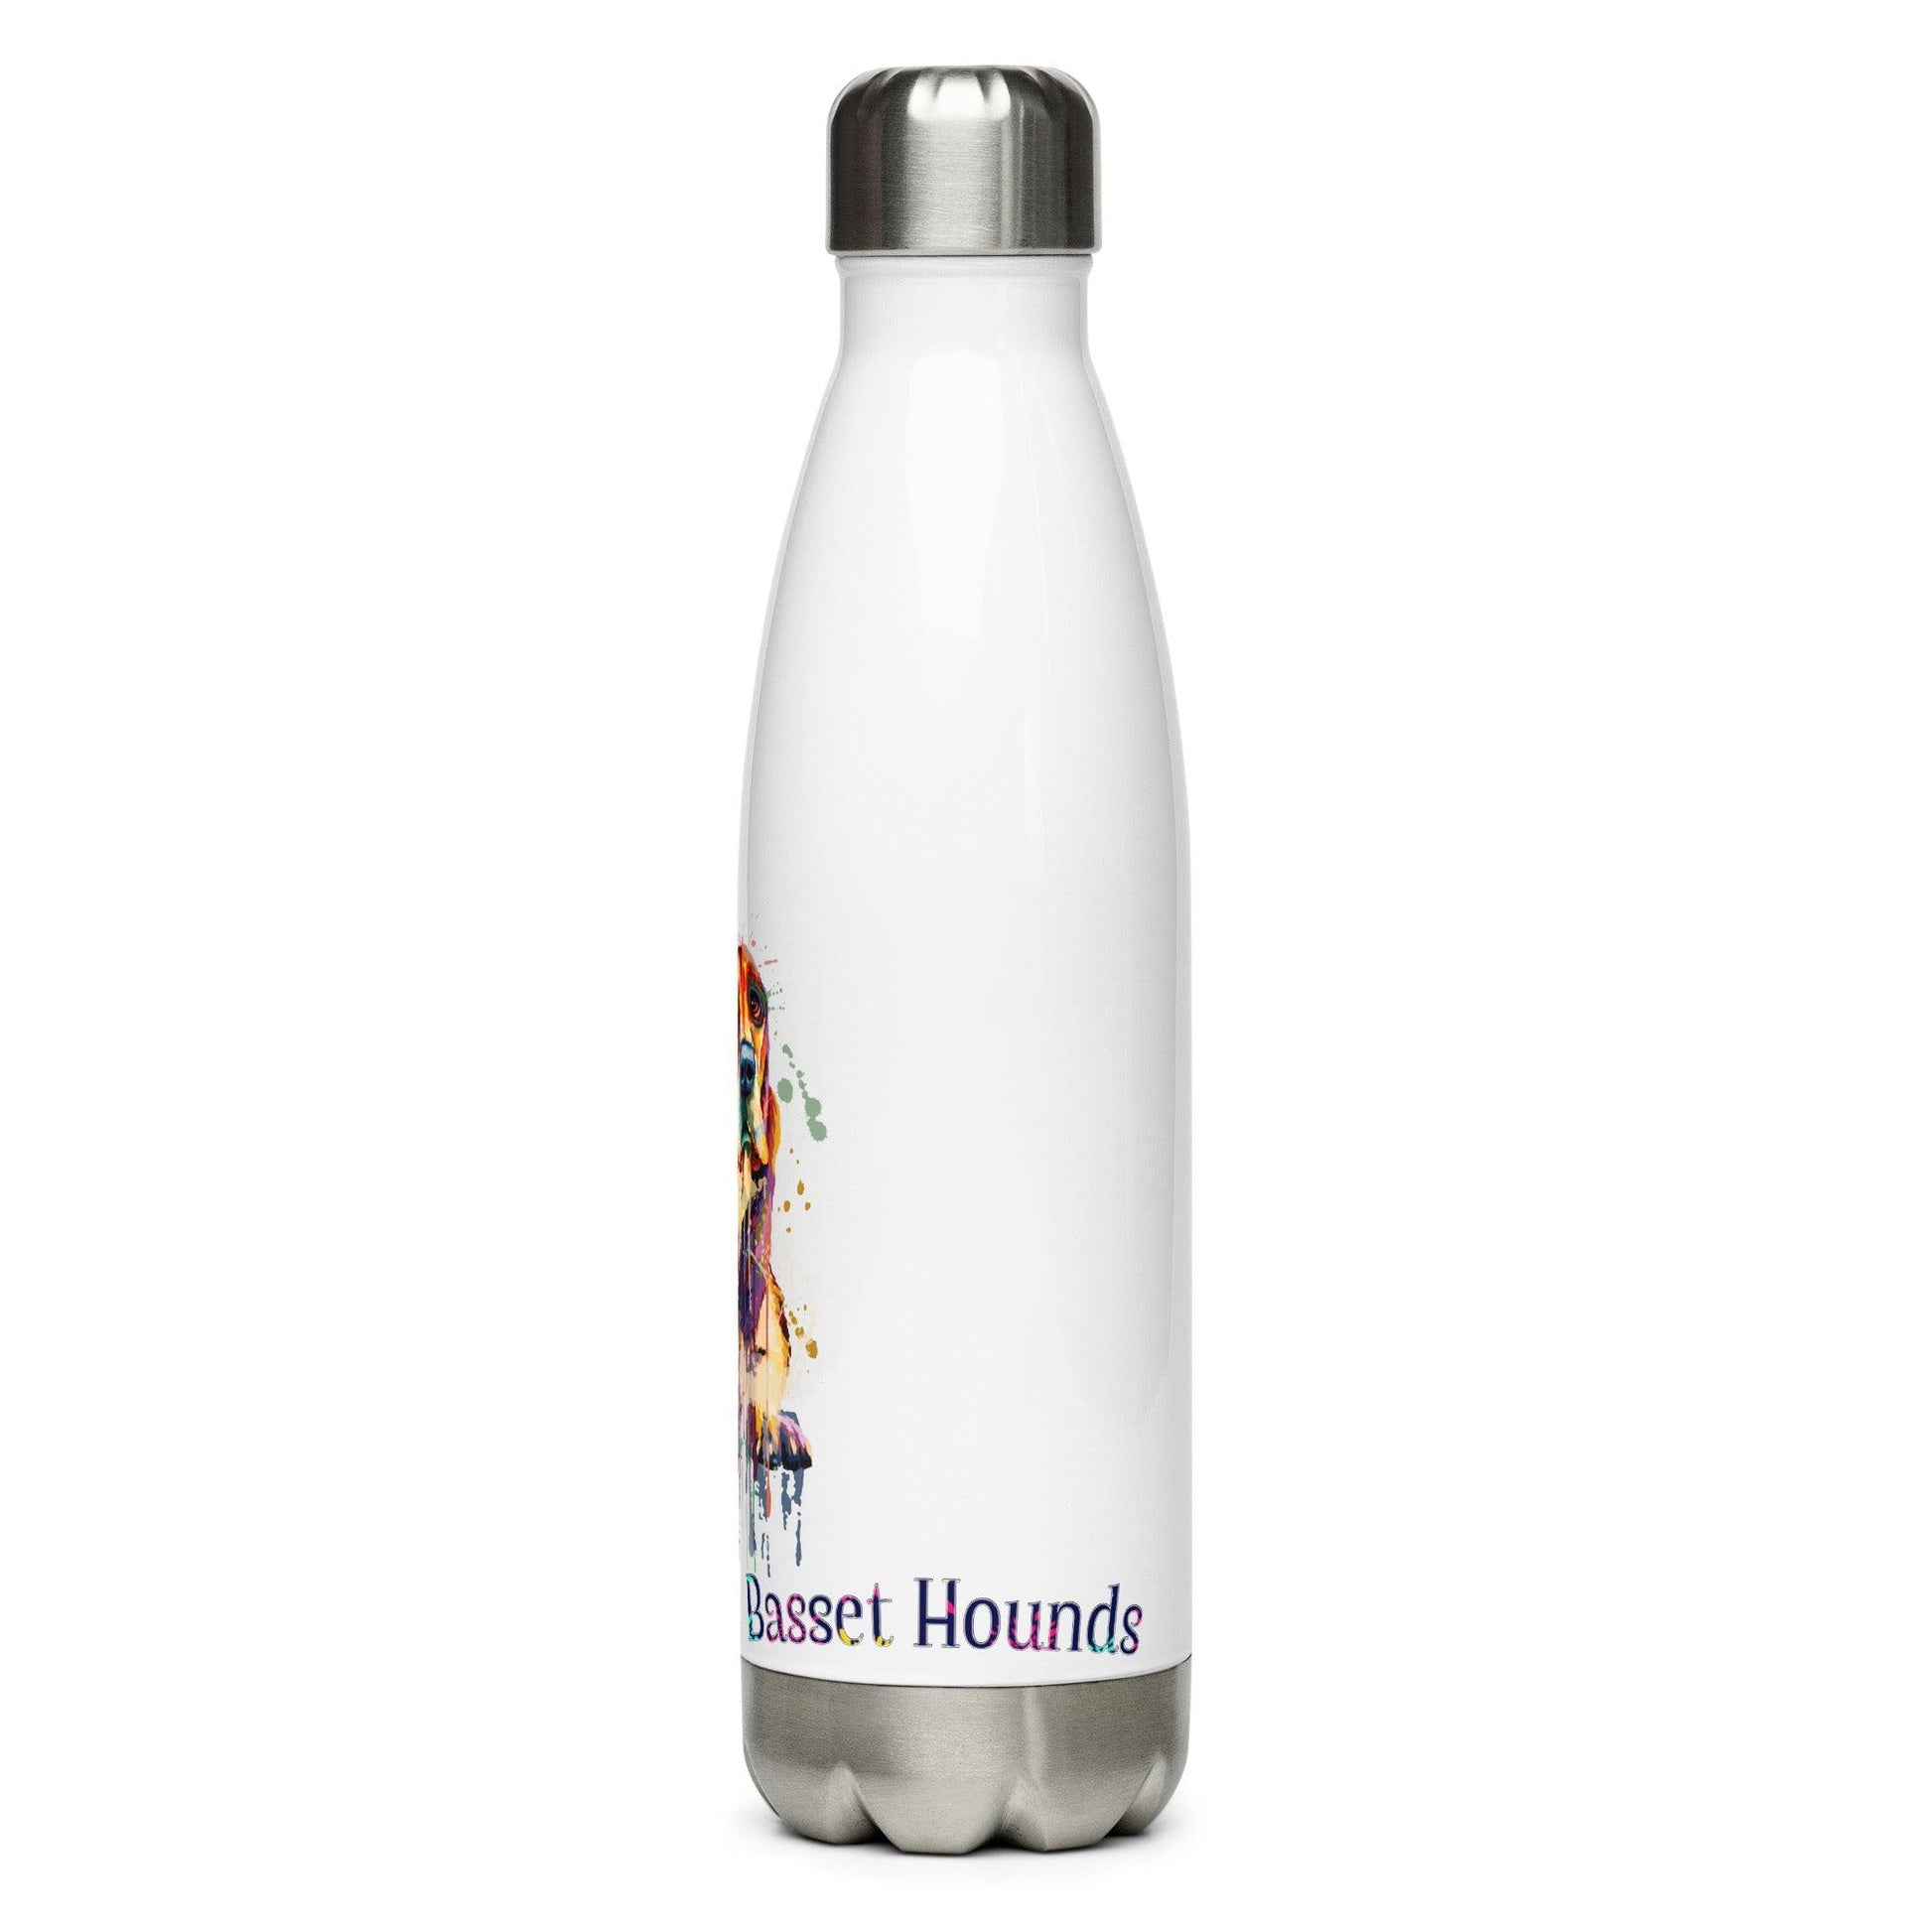 I Love Basset Hounds Stainless Steel Water Bottle - L & M Kee, LLC